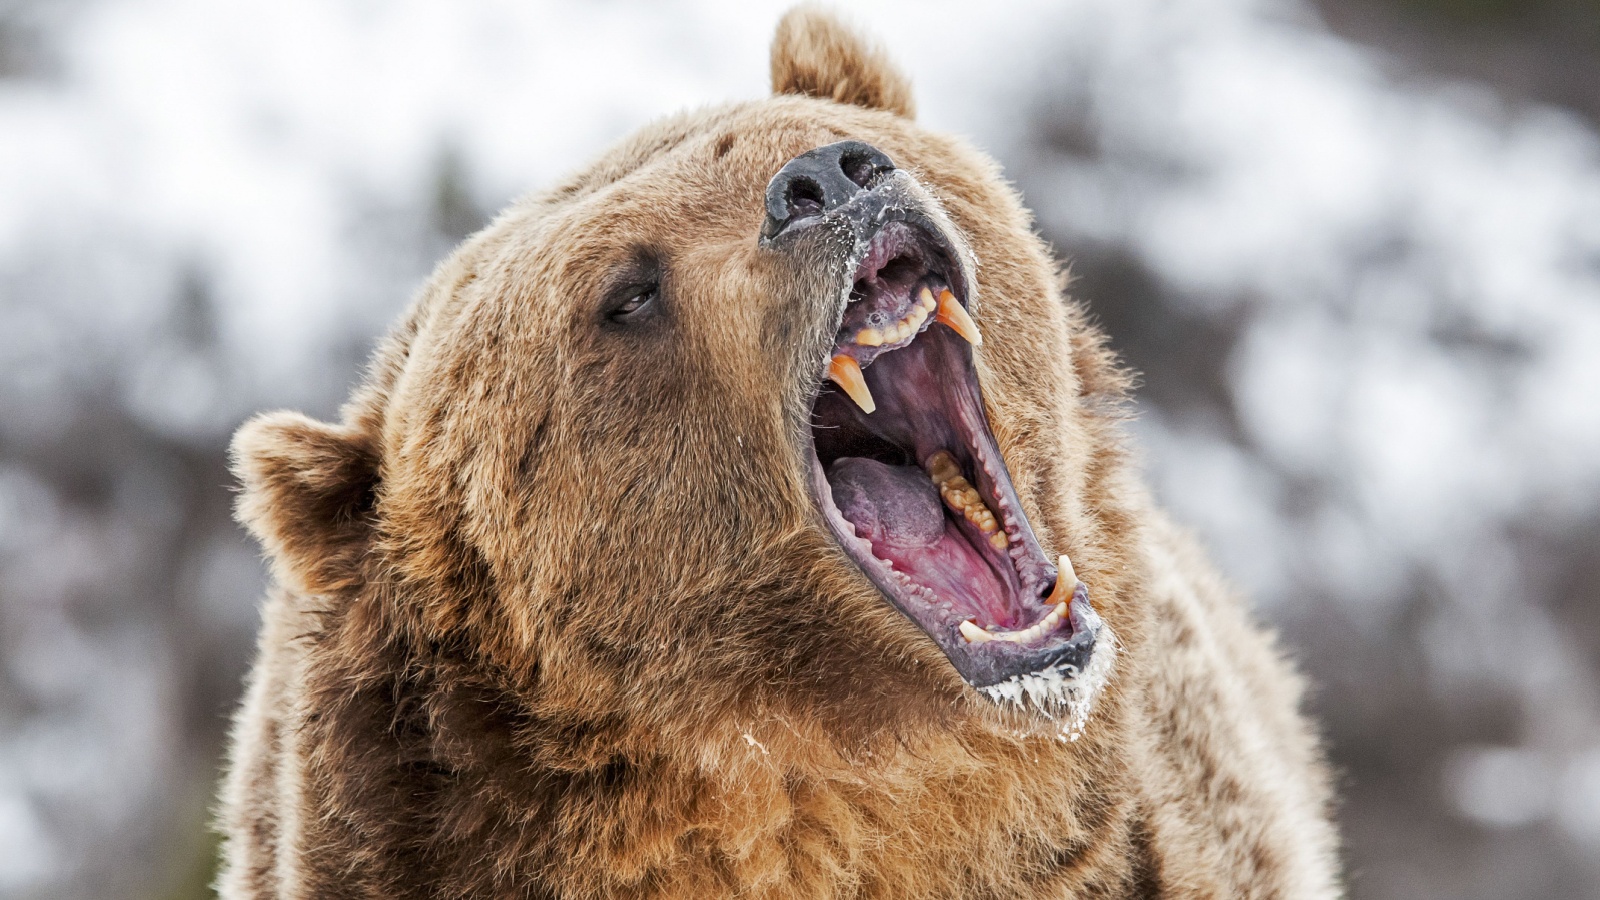 image credit: Scott E Read/Shutterstock <p>In the dense forests of North America, the grizzly bear commands respect from all who cross its path. Each year, these giants are responsible for several attacks on humans, often due to surprise encounters or protective mothers defending their cubs. Venturing into grizzly territory requires caution, respect, and a keen awareness of your surroundings.</p>